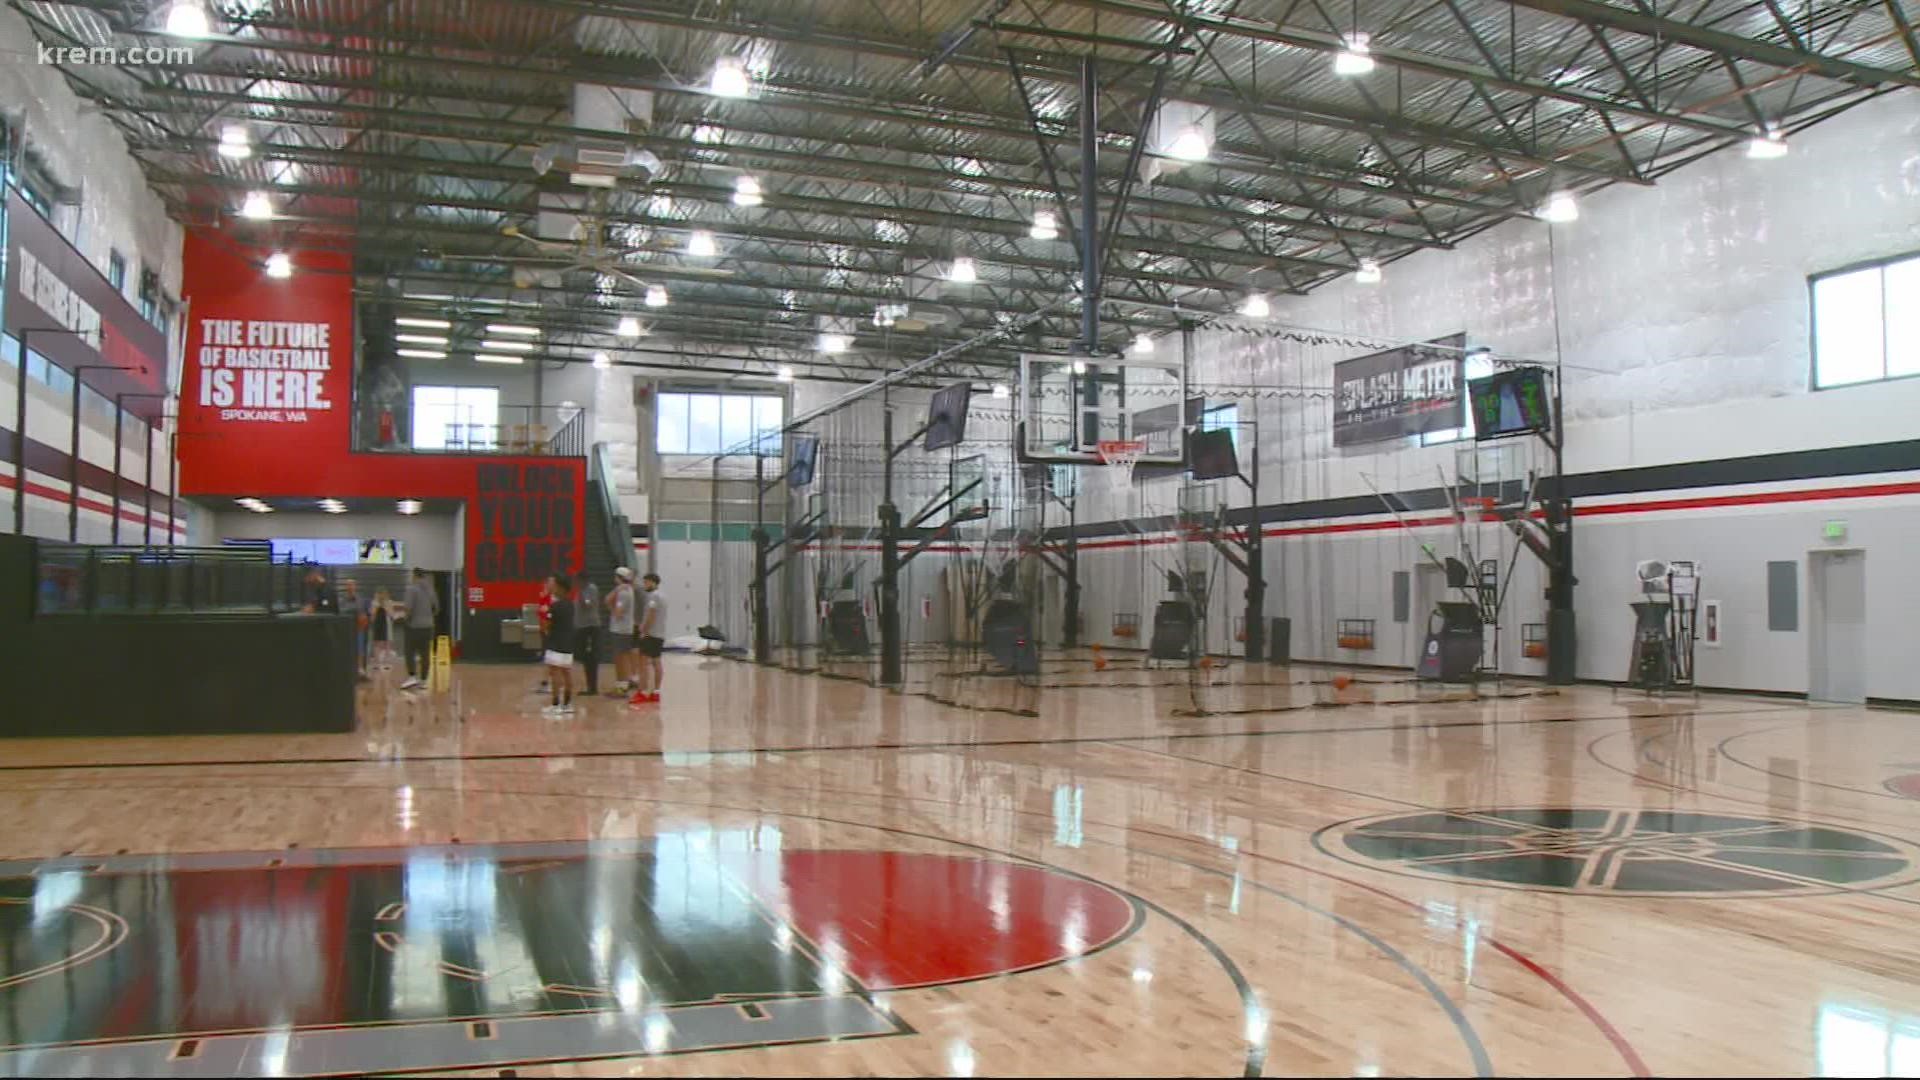 The new Shoot 360 offers a skill development pods and other stations where players can work on ball handling, passing and shooting.